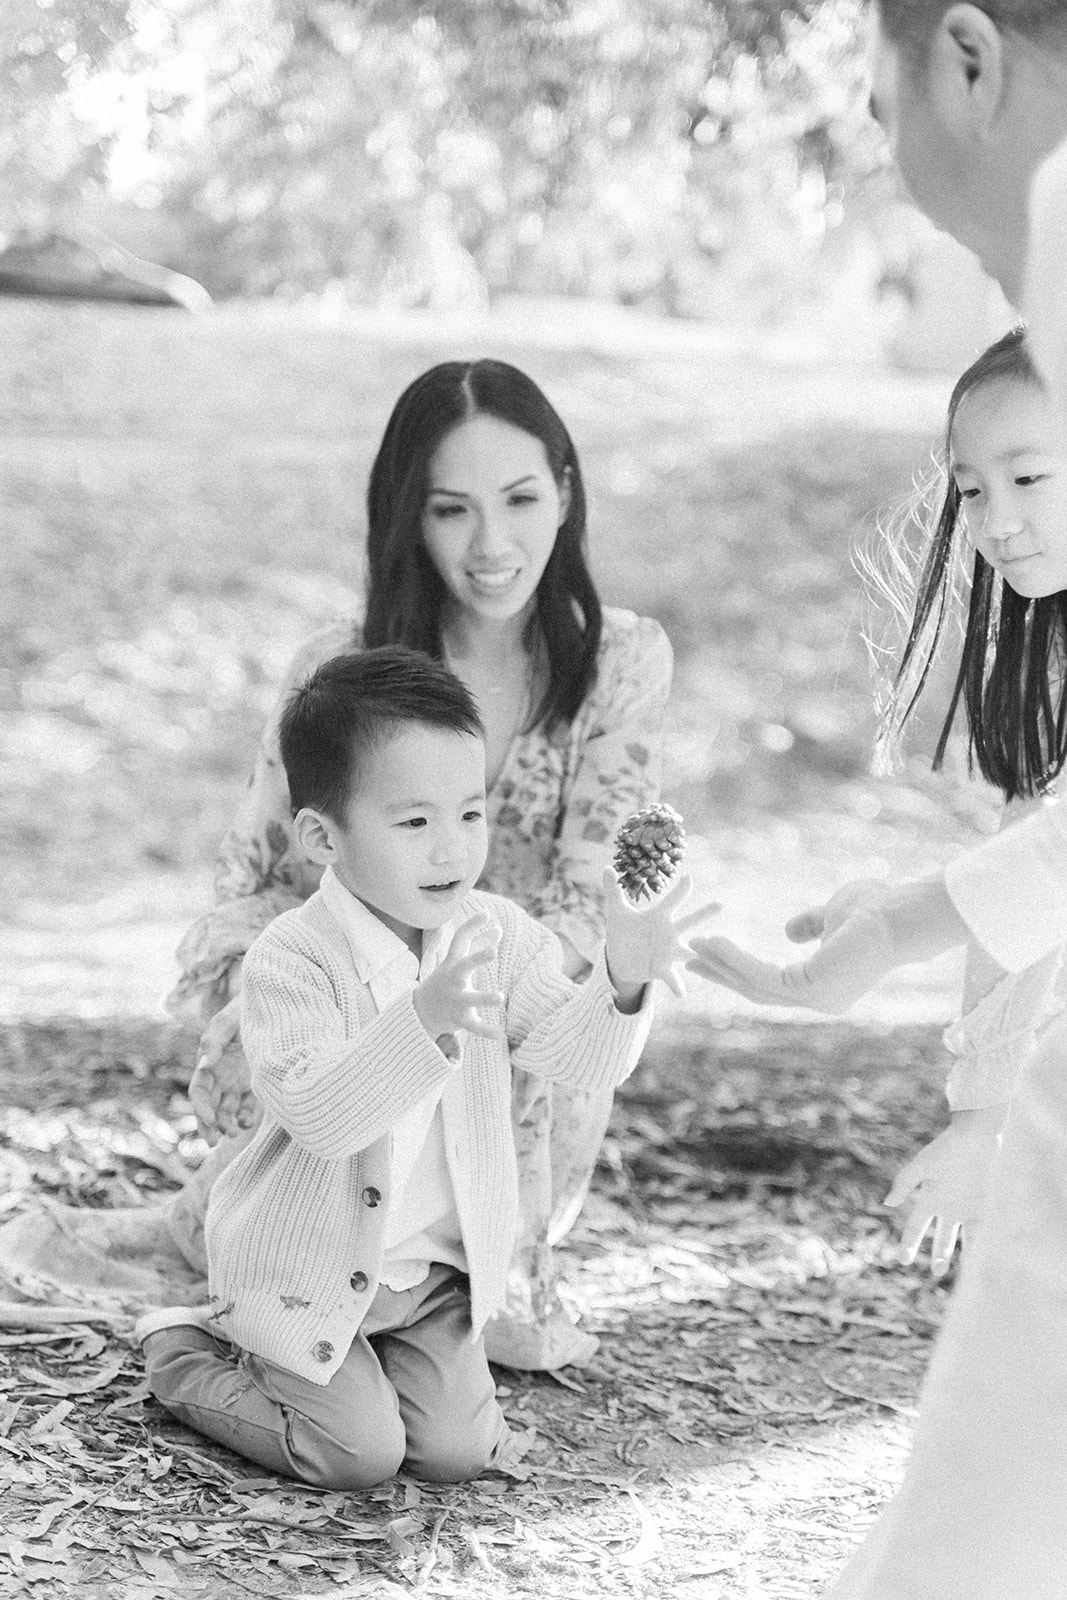 A young boy plays with a pinecone in a park with mom dad and older sister